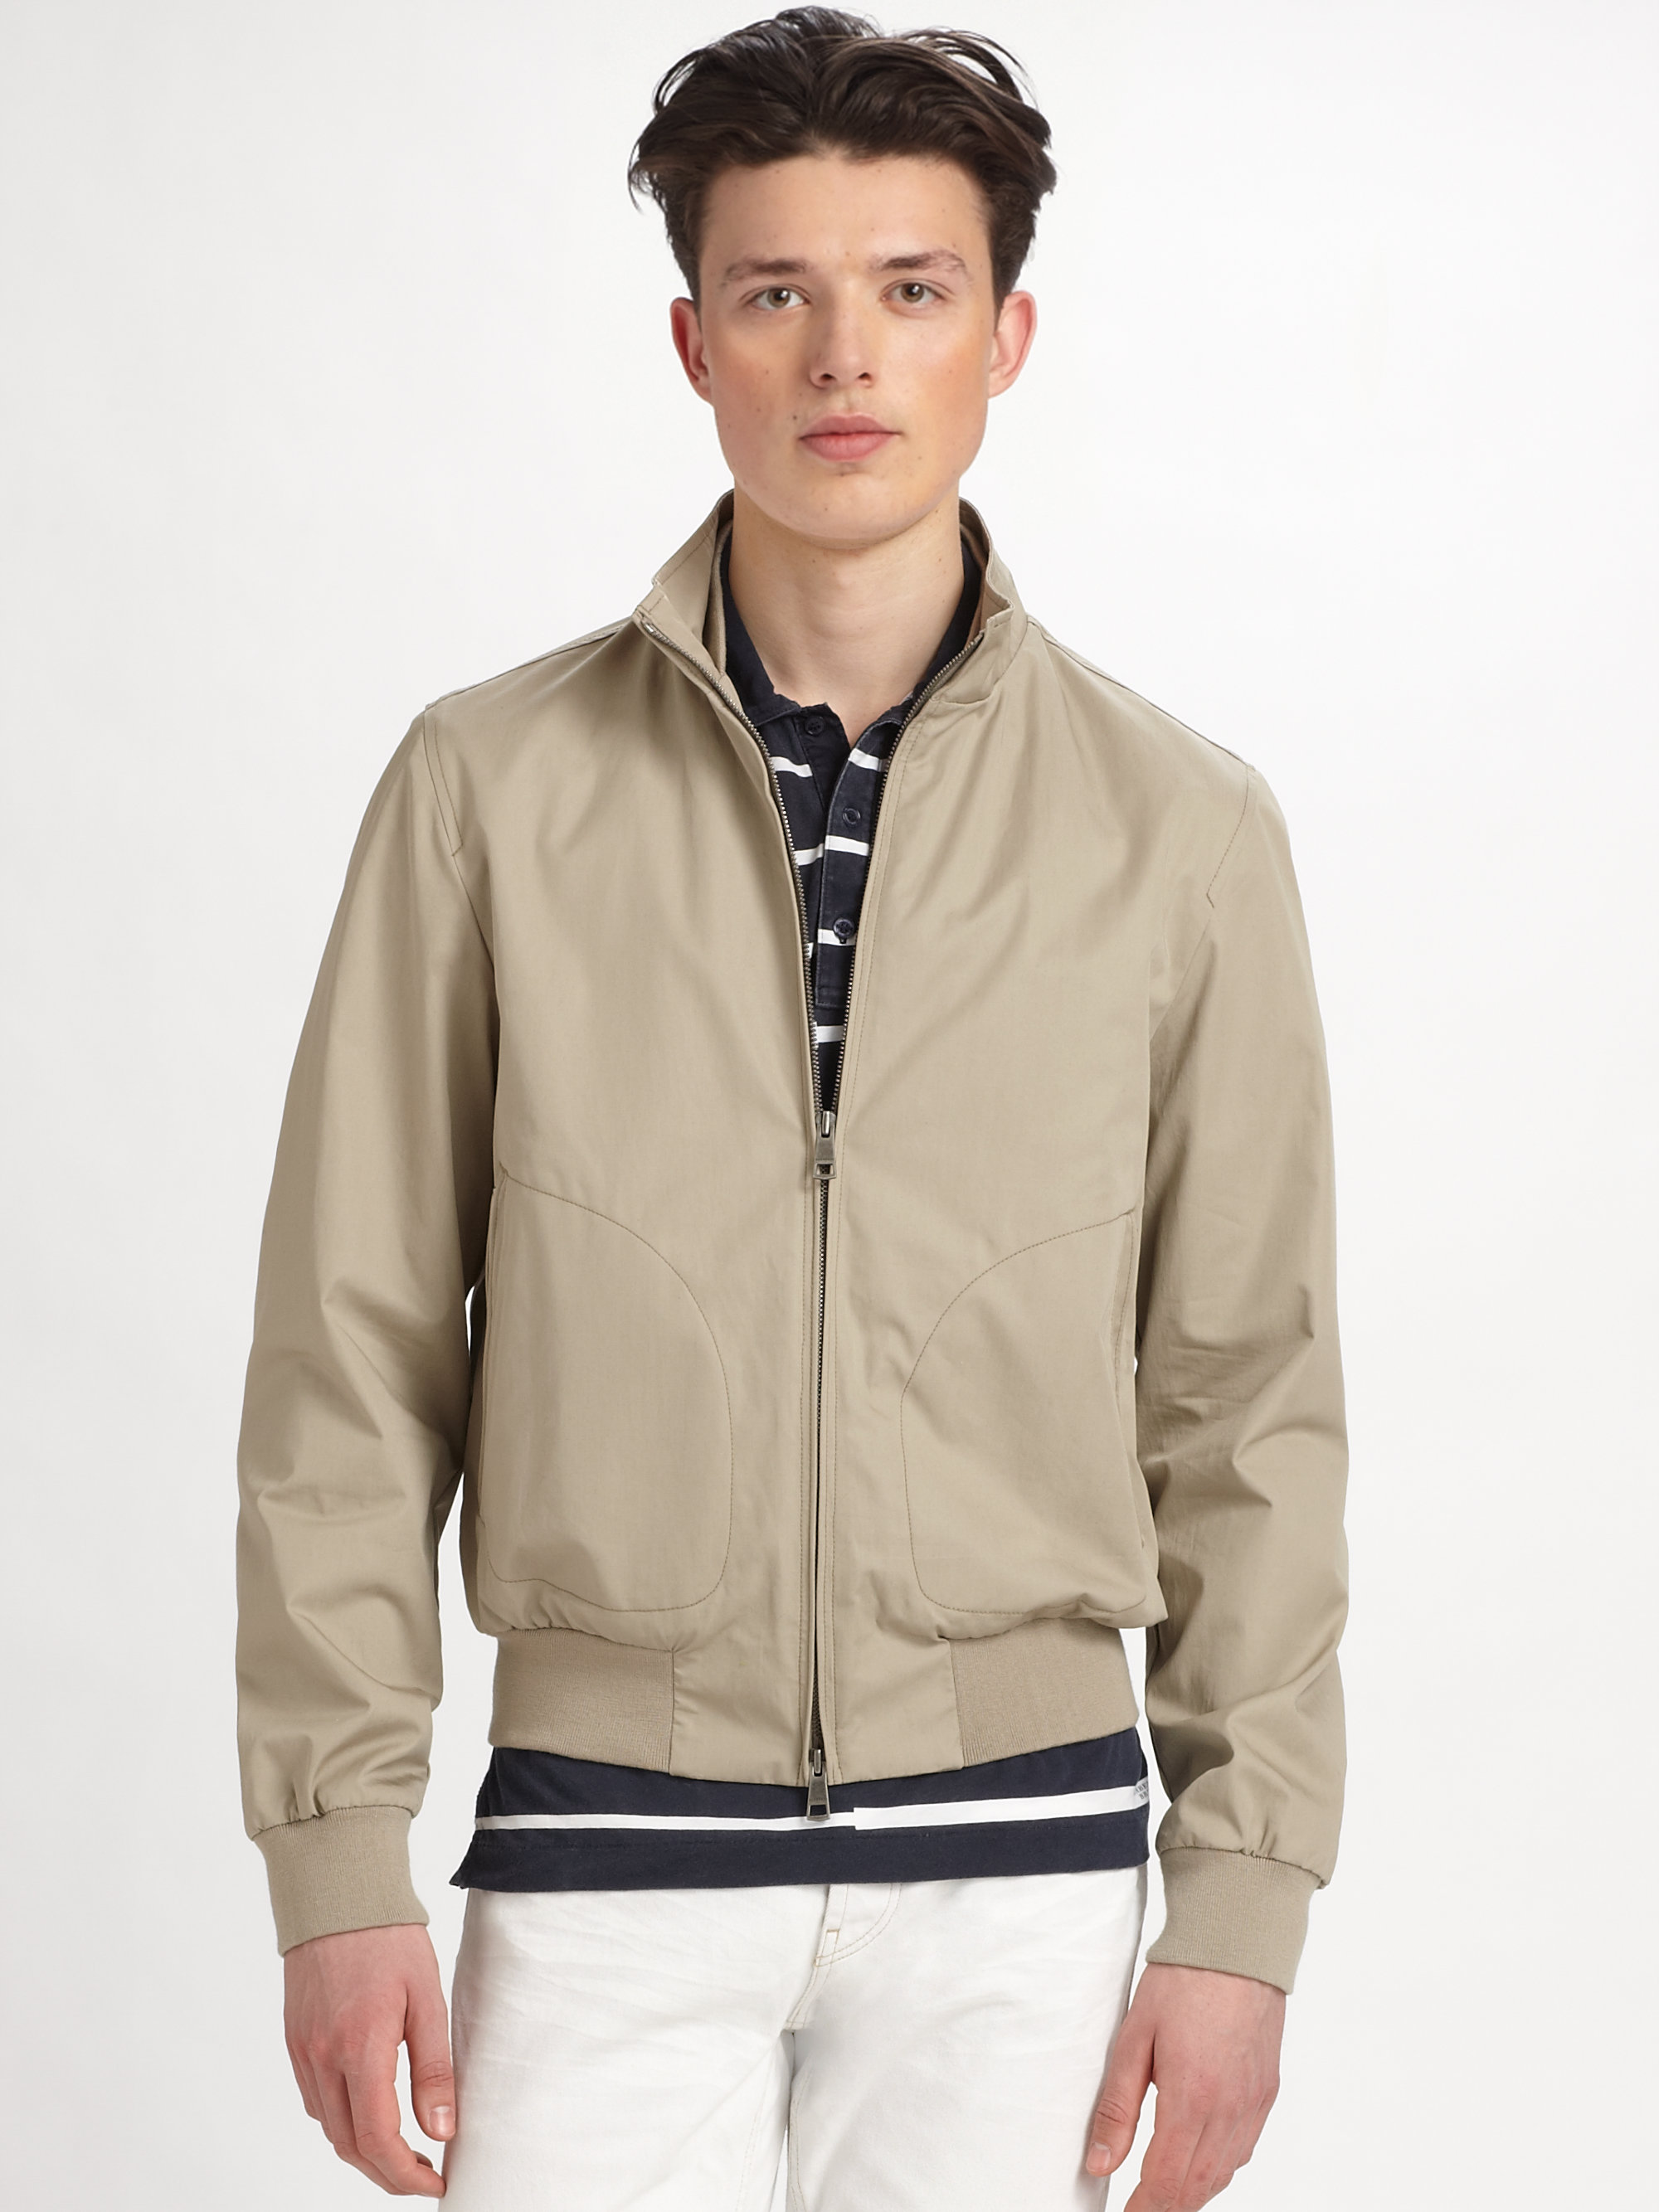 Burberry Brit Lightweight Rain Jacket in Taupe (Gray) for Men - Lyst